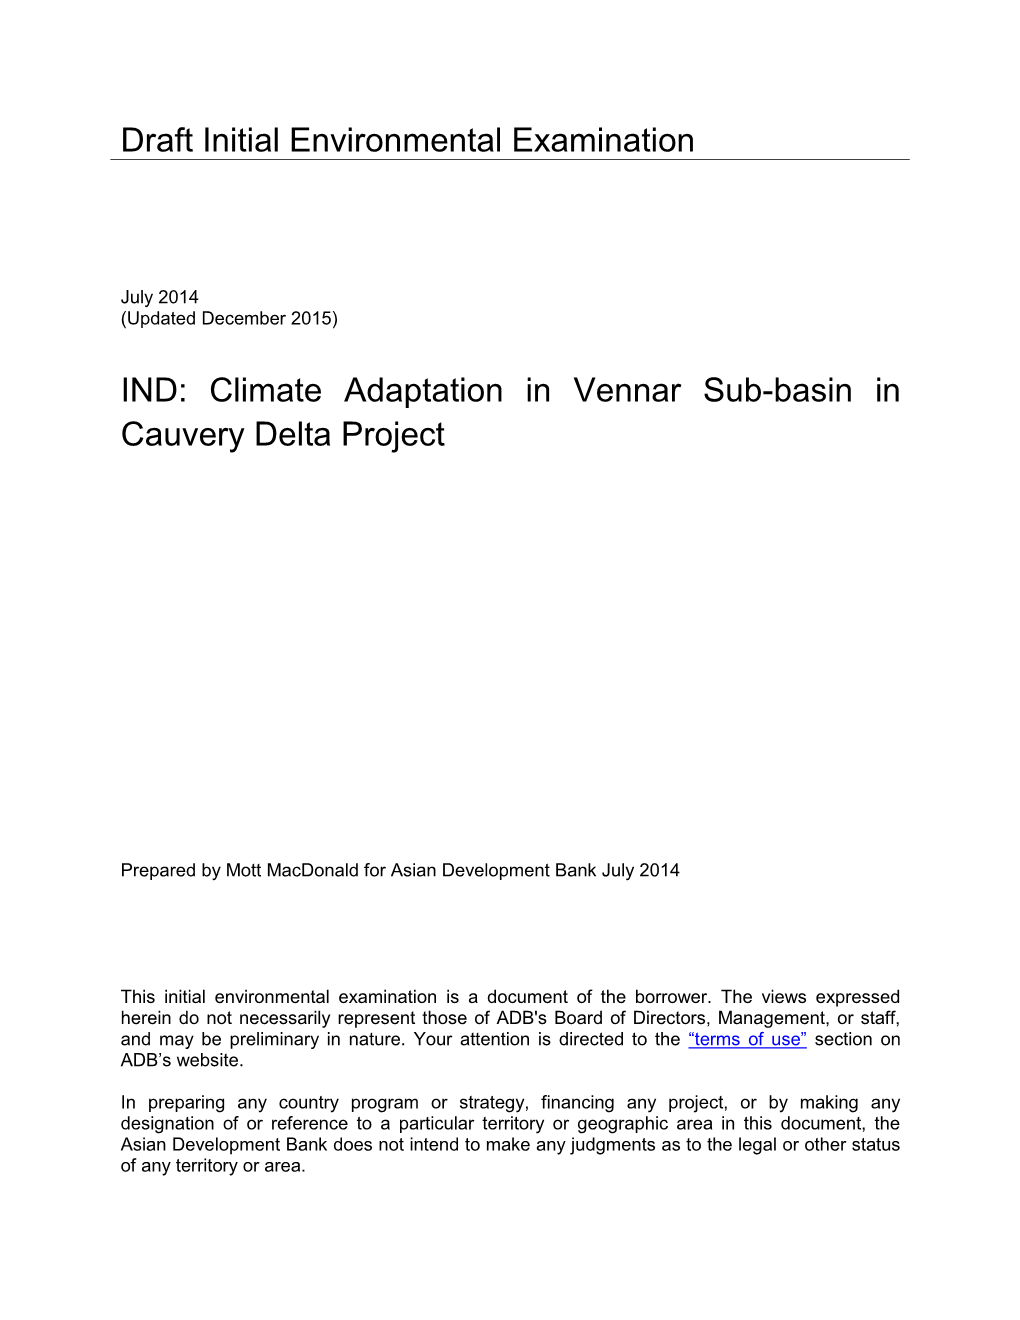 Climate Adaptation in Vennar Sub-Basin in Cauvery Delta Project